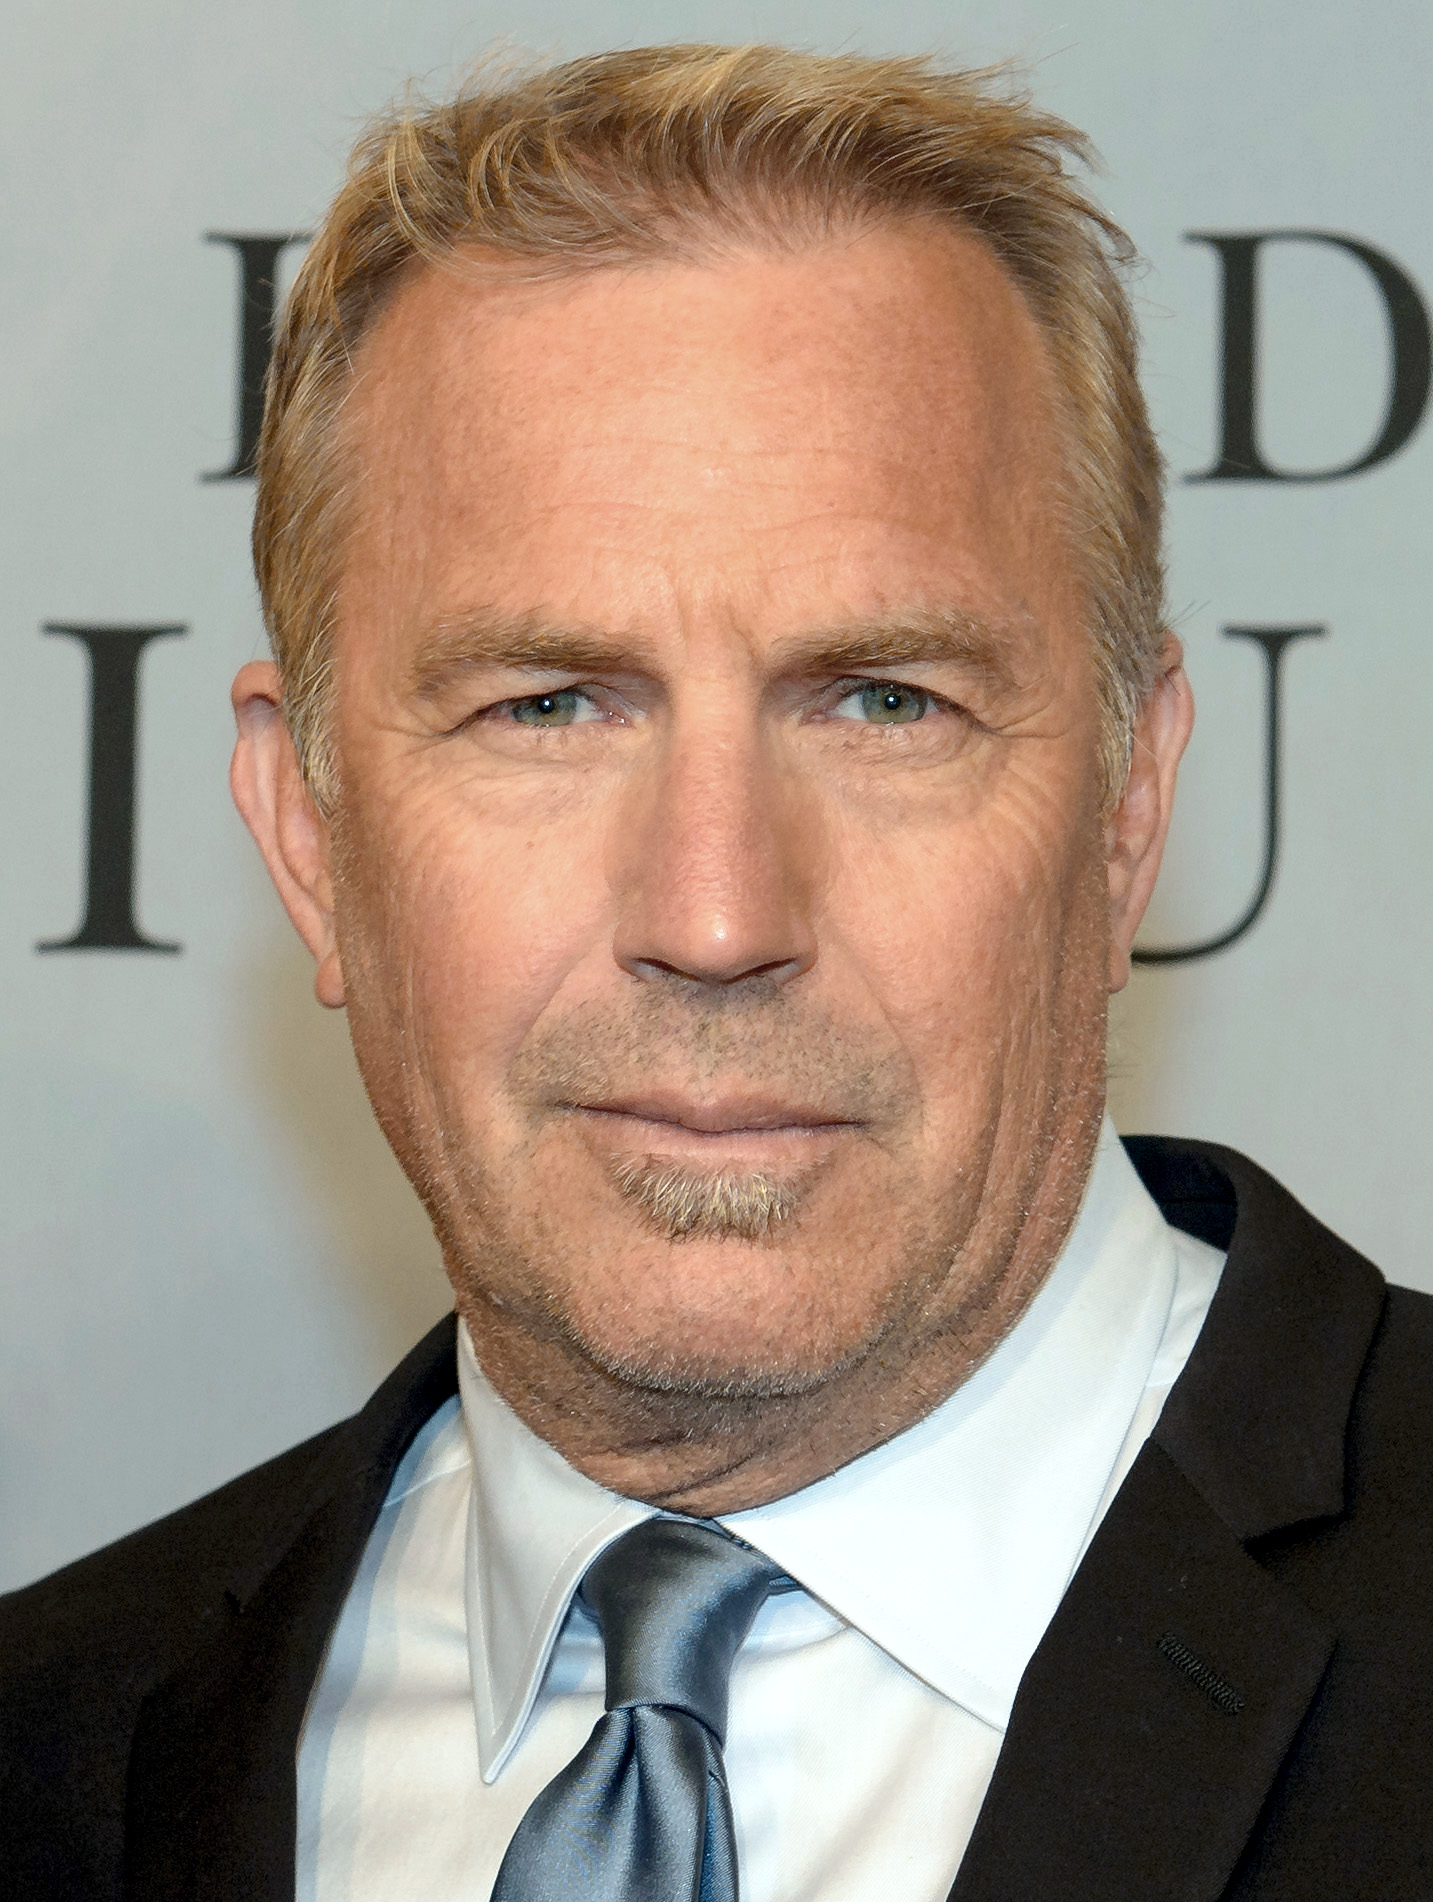 Kevin Costner's Western film ‘Horizon’ to debut at Cannes Film Festival